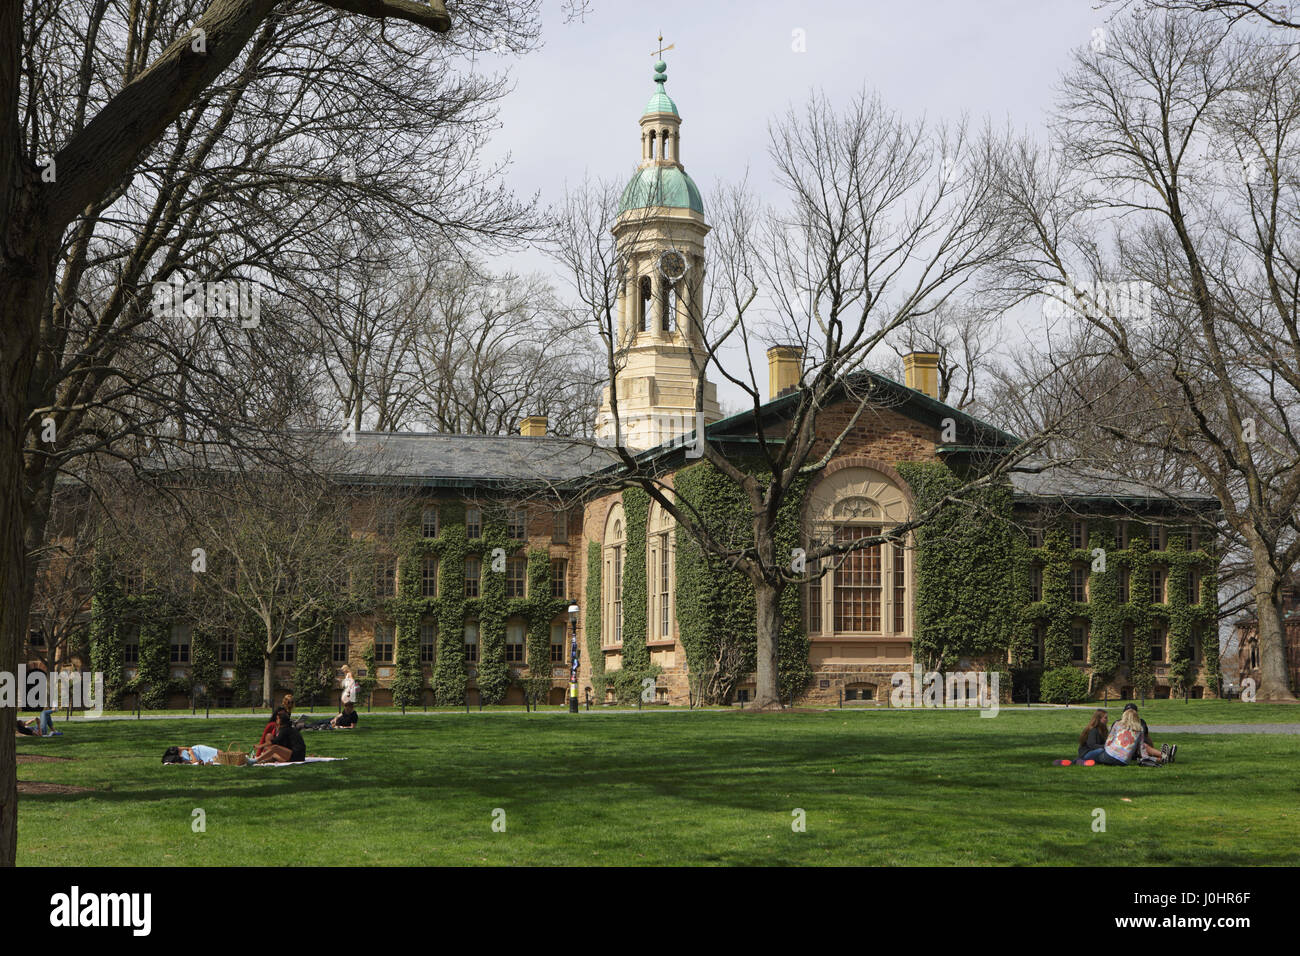 Princeton, NJ, USA - April 11, 2017: Princeton University Campus in spring. Nassau Hall and Cannon Green. Students sitting on the lawn on a sunny day. Stock Photo